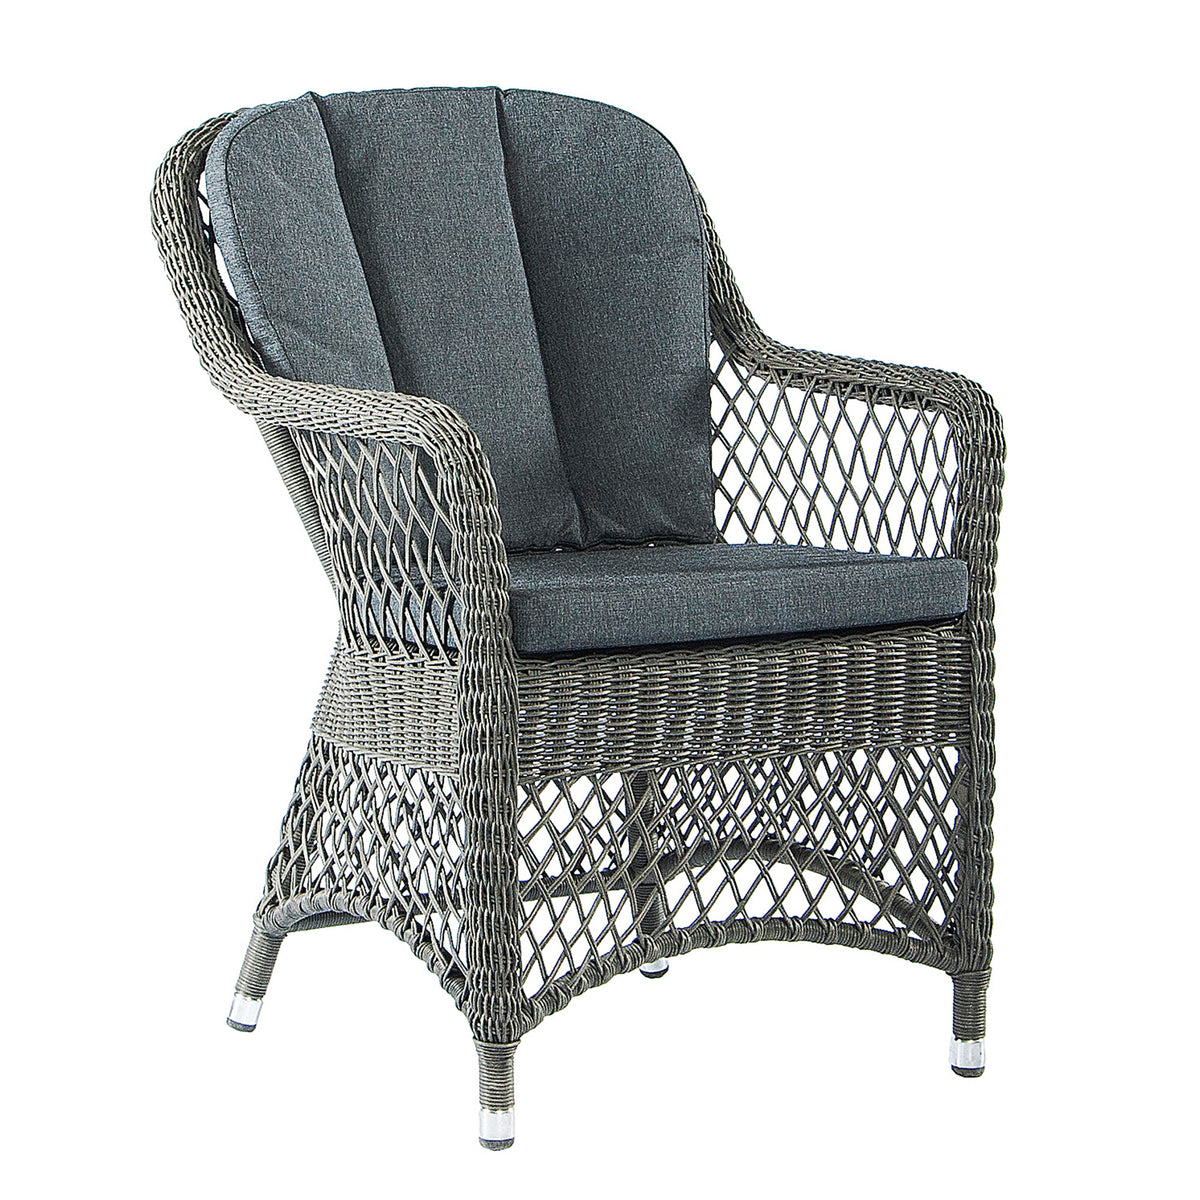 Alexander Rose Monte Carlo Open Weave Armchair with Cushion